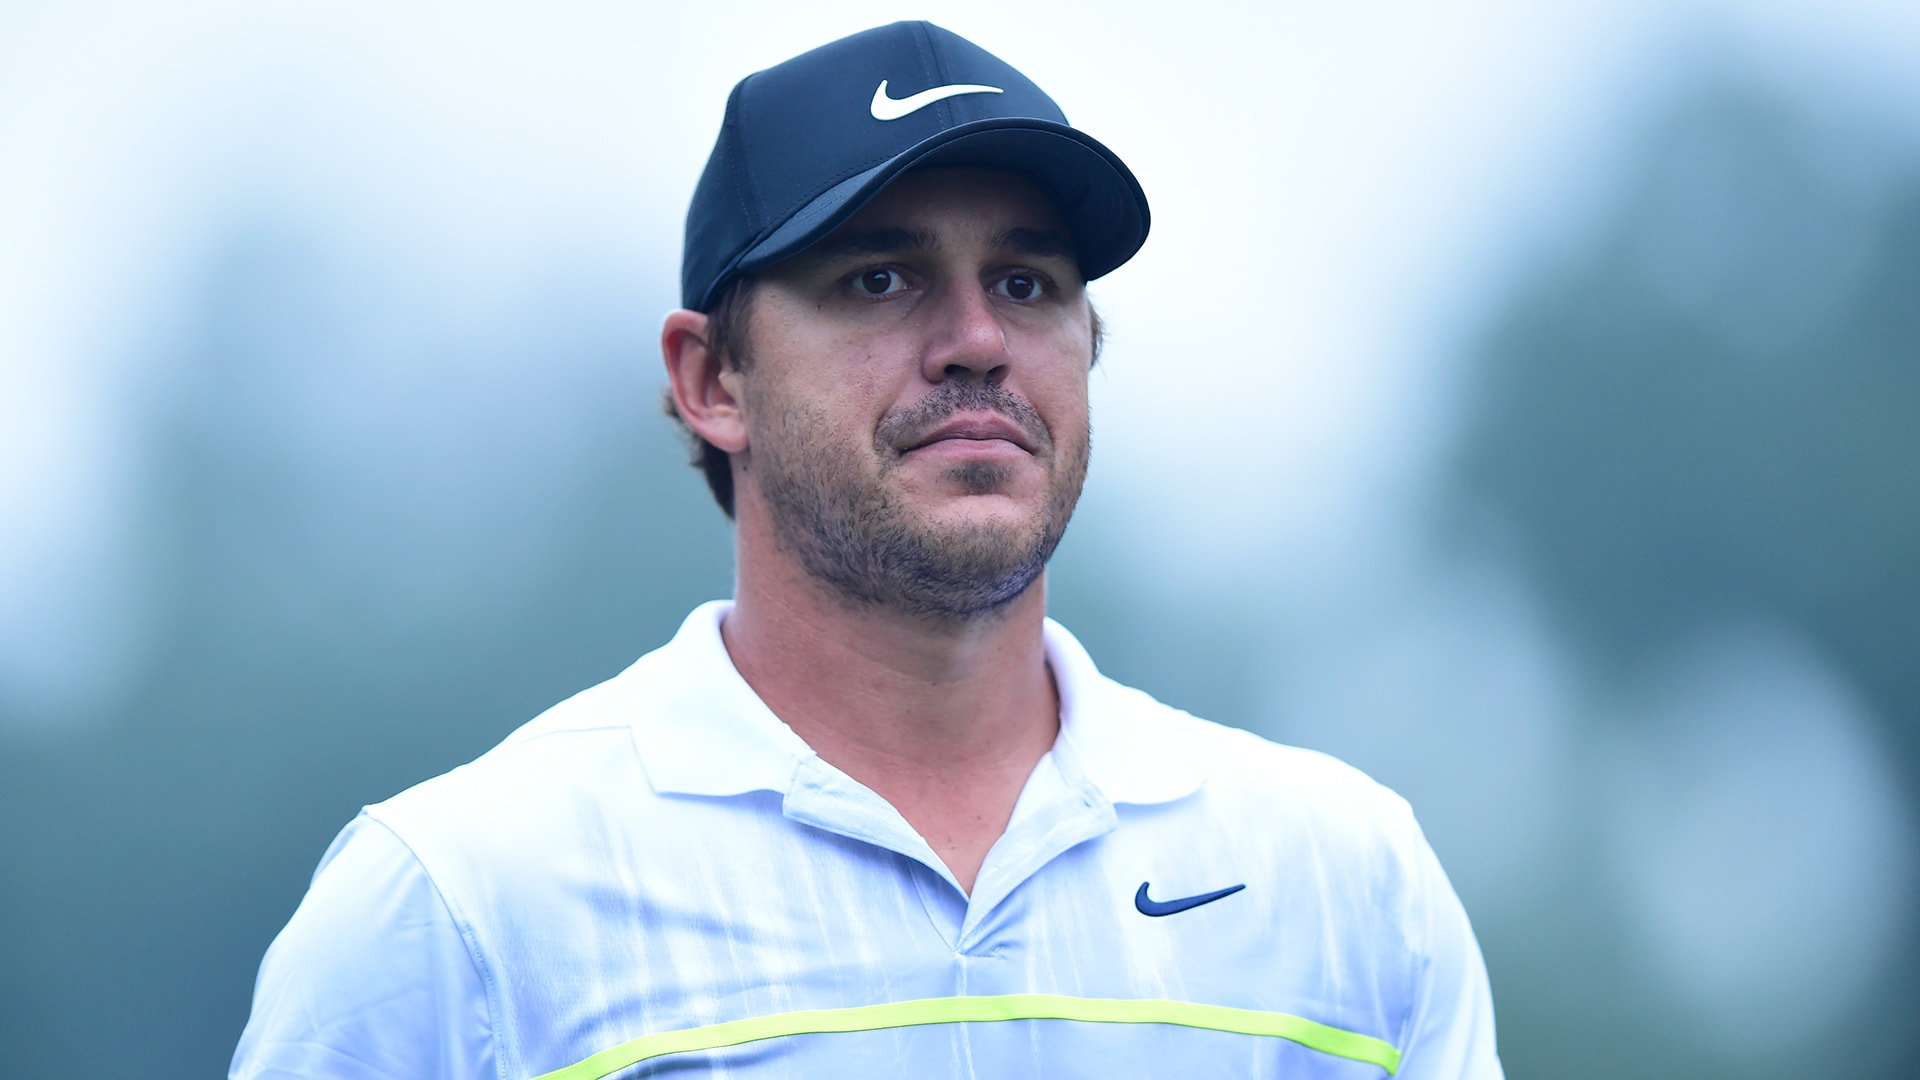 Brooks Koepka details injuries but says he’s ‘a million times’ better